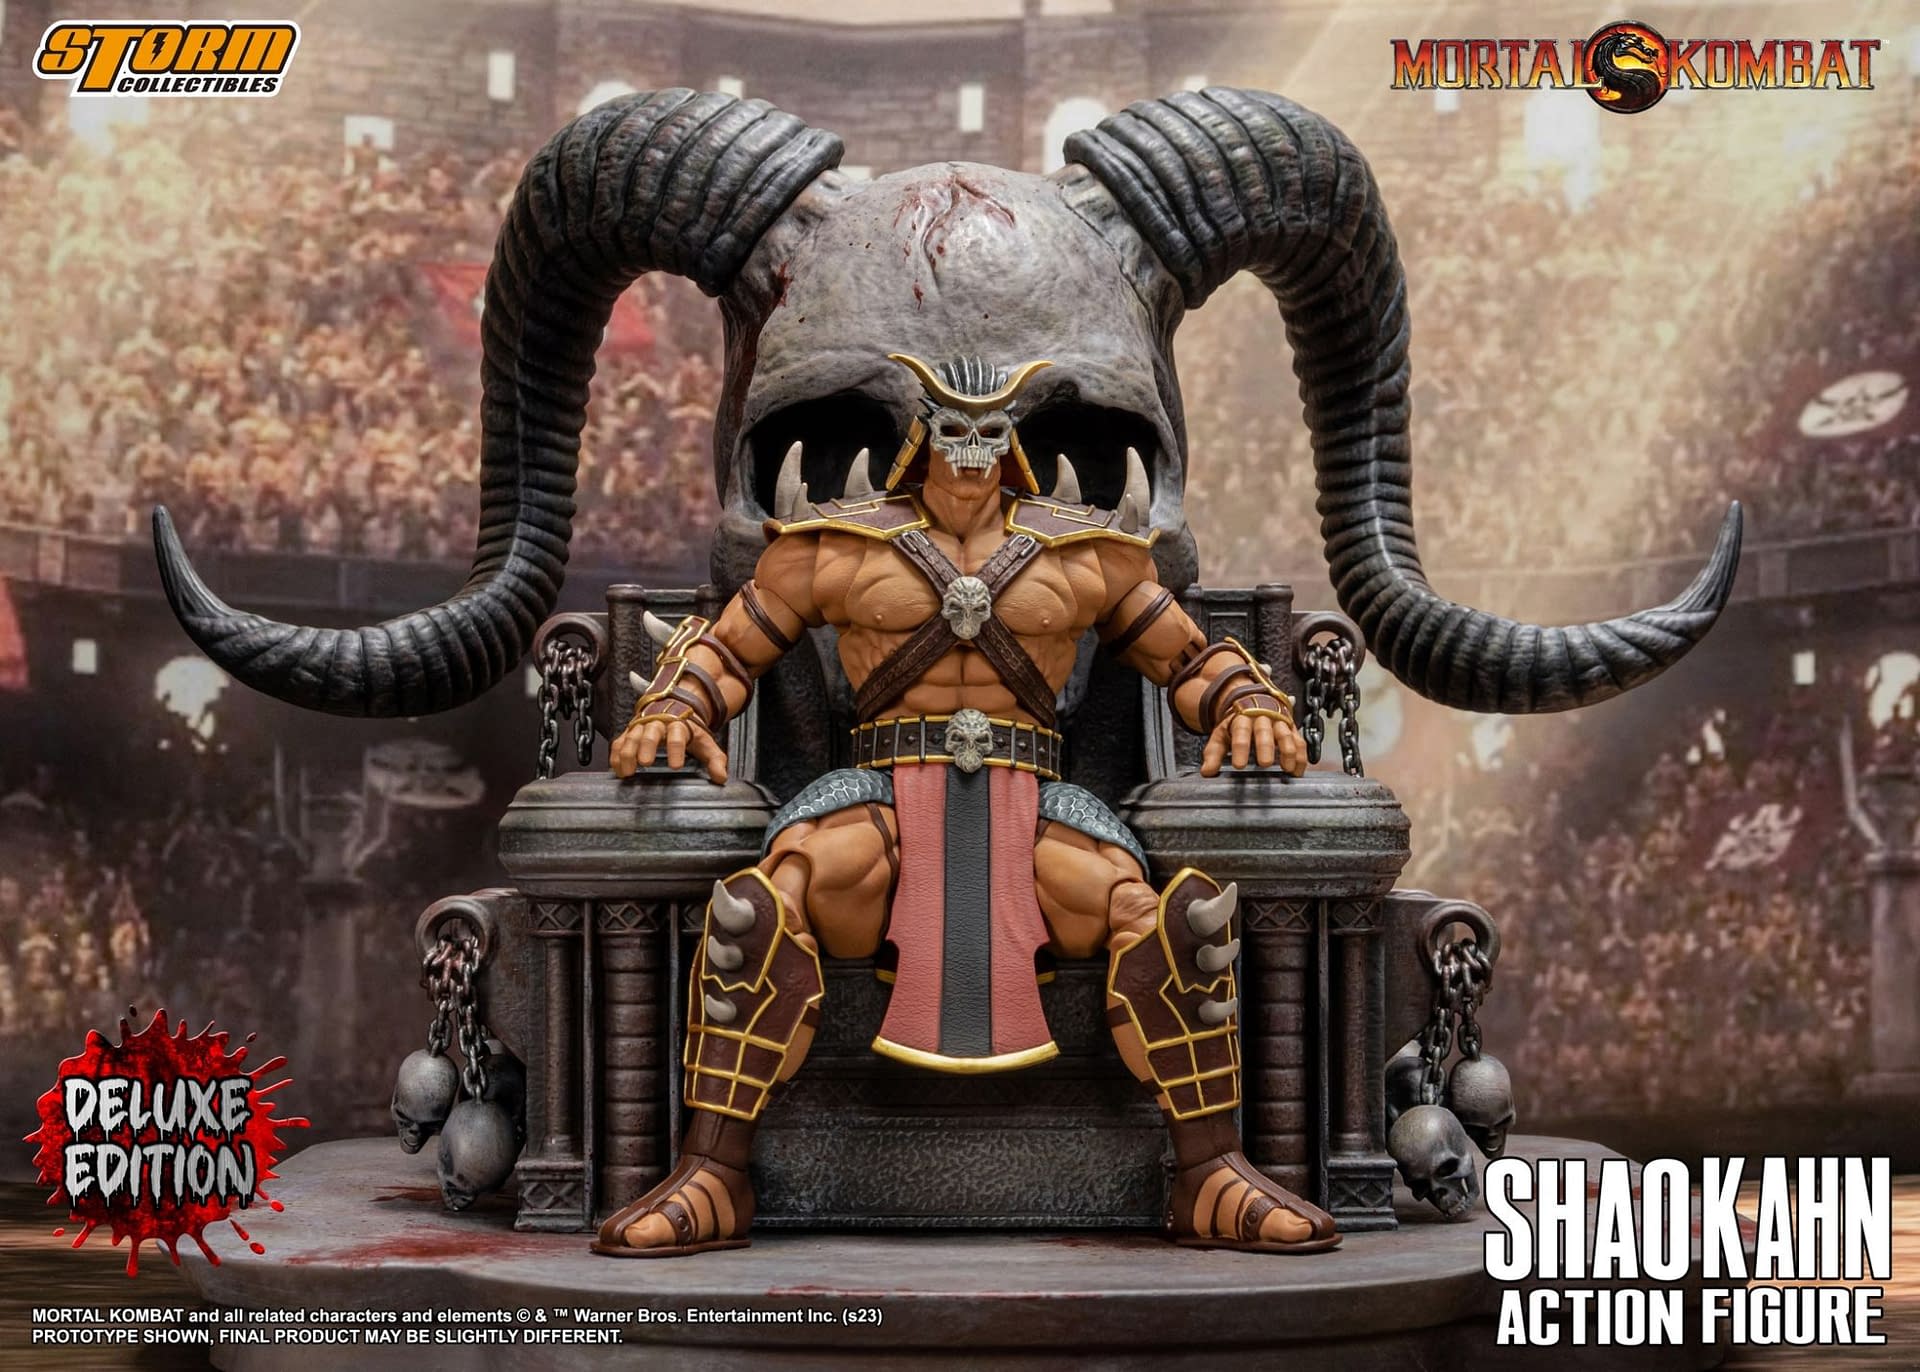 Mortal Kombat Shan Kahn Sits Upon His Throne with Storm Collectibles 